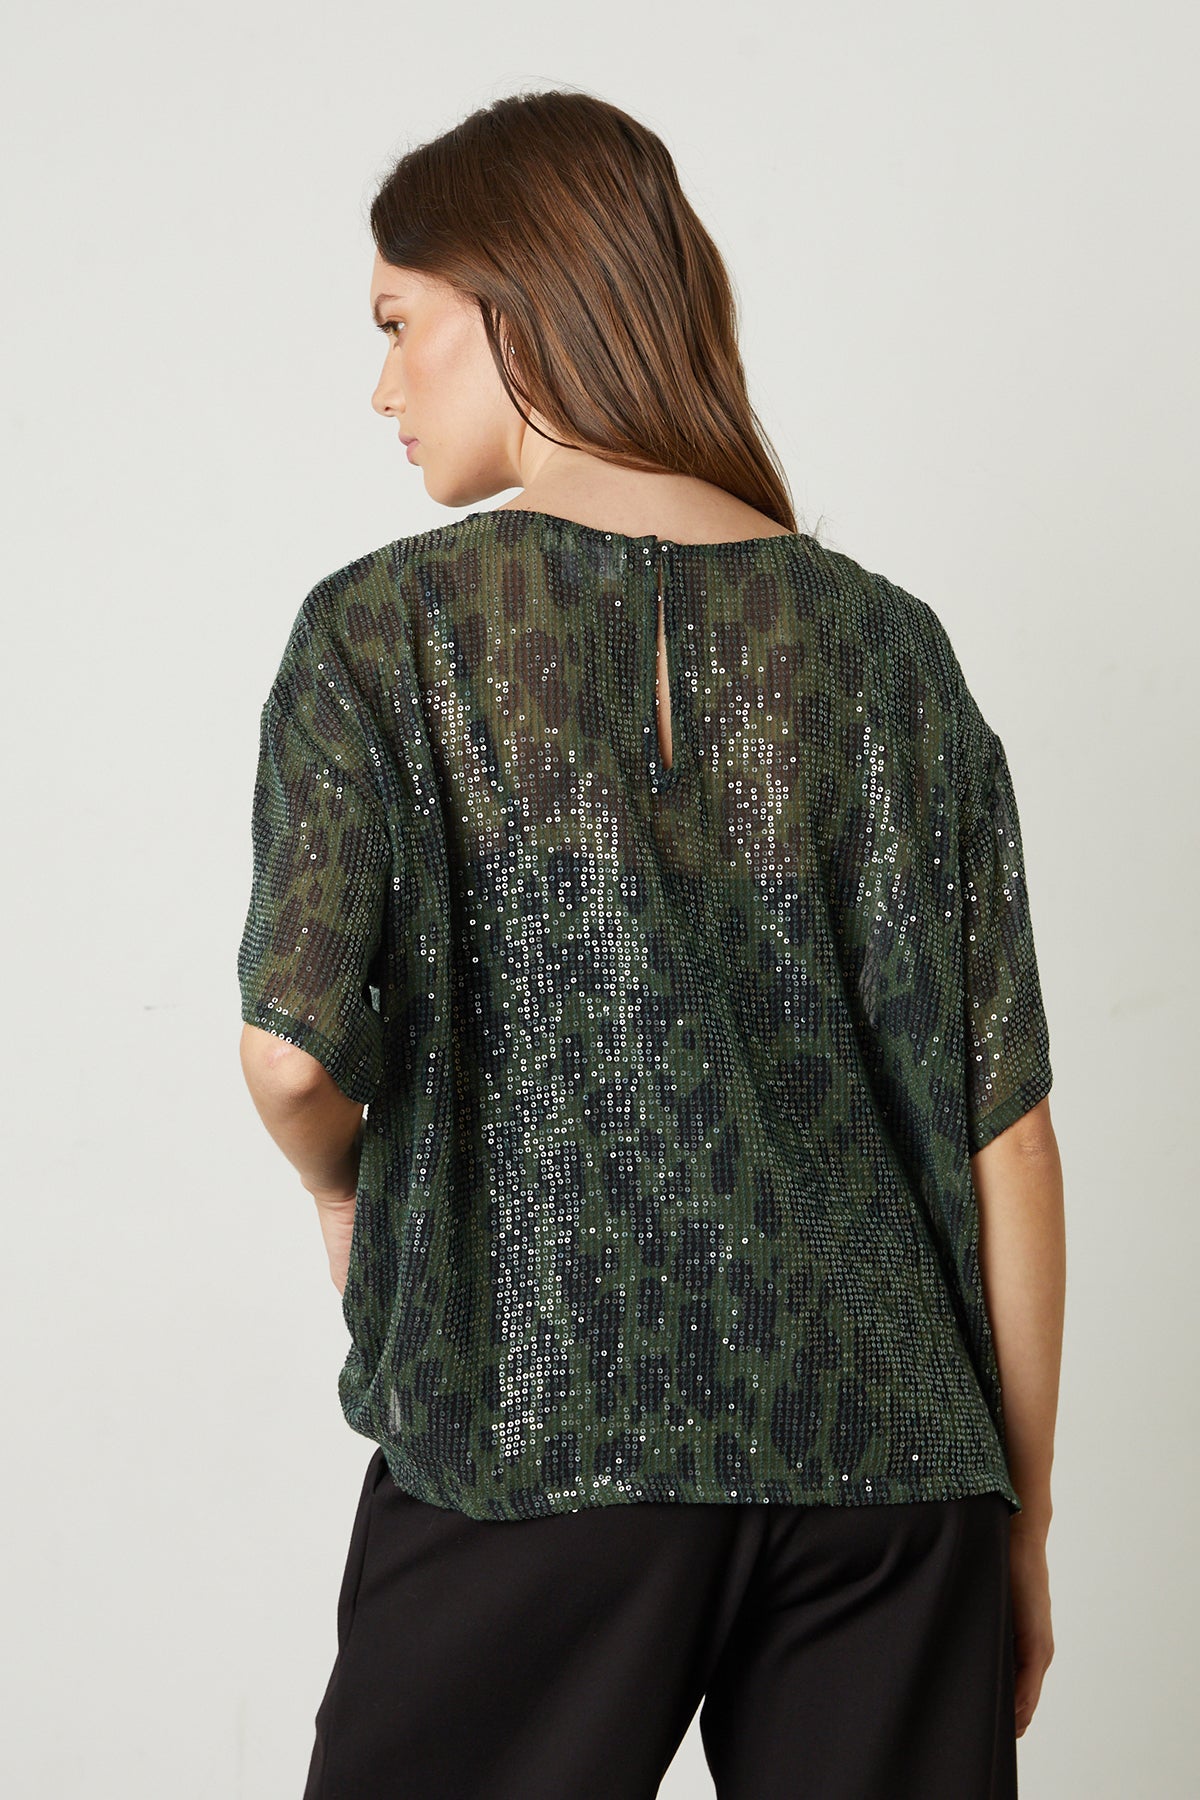   Alessa Printed Sequin Top in airbrush muted green and black mottled pattern back 